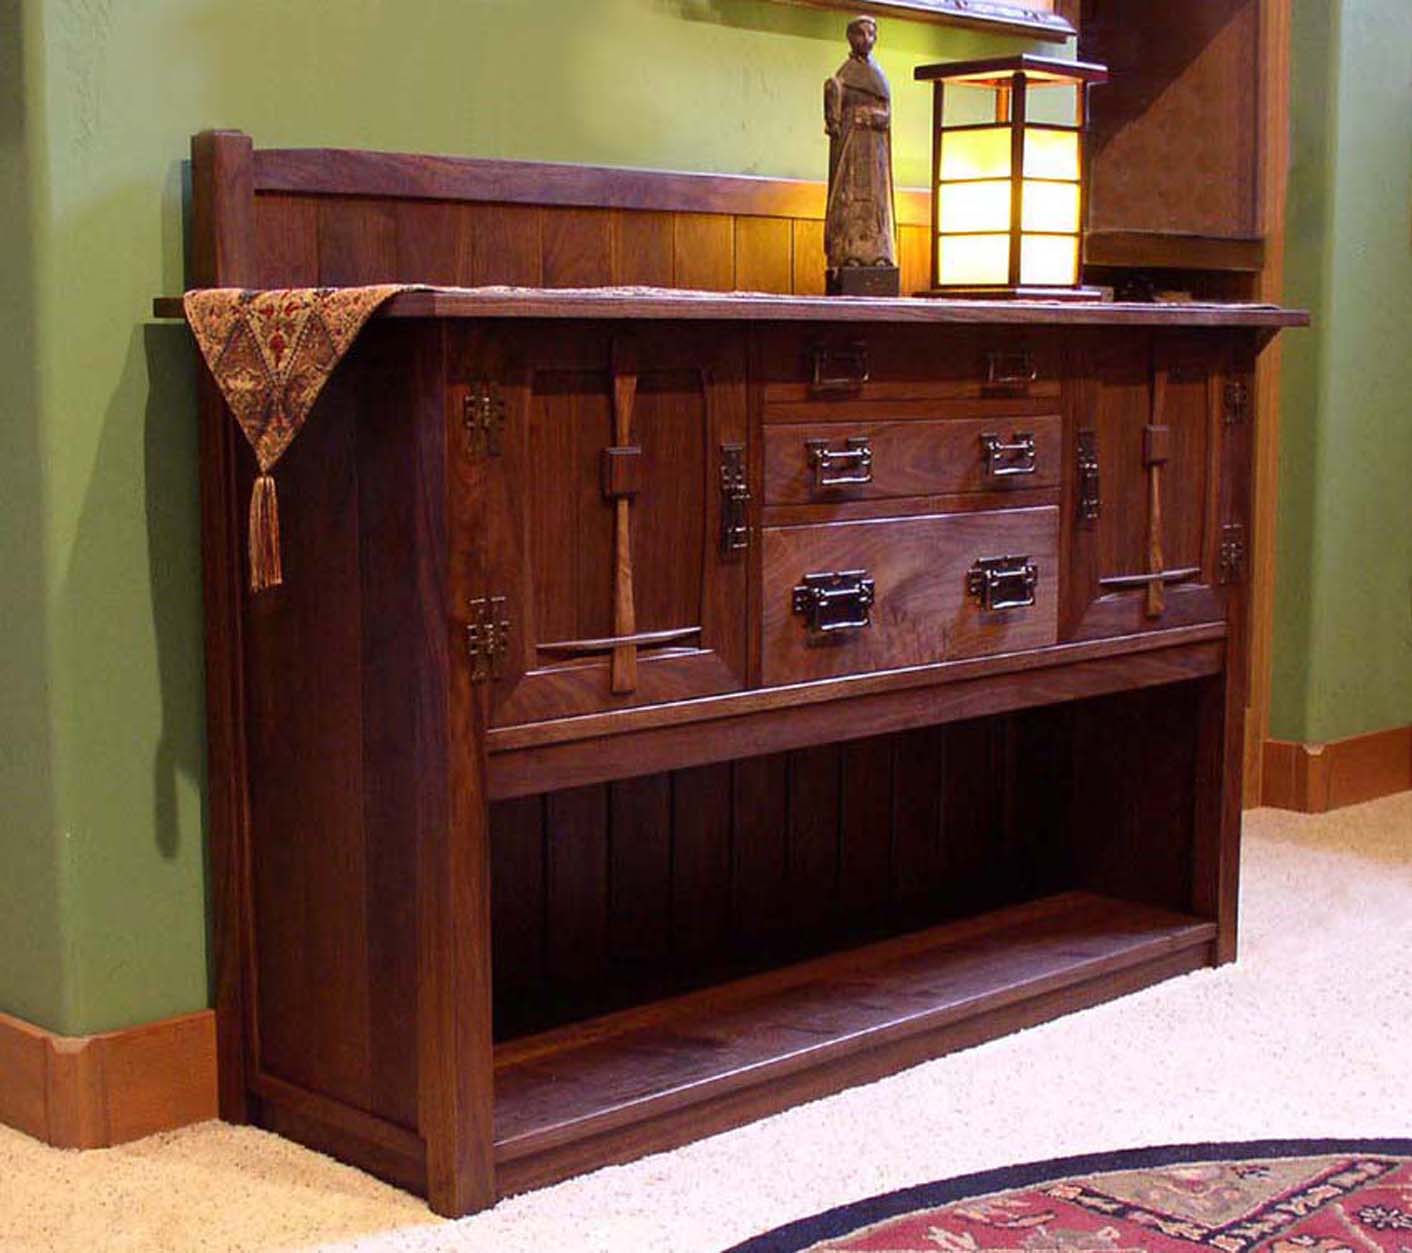 Walnut Credenza - Custom Proportioned to the Room Placement